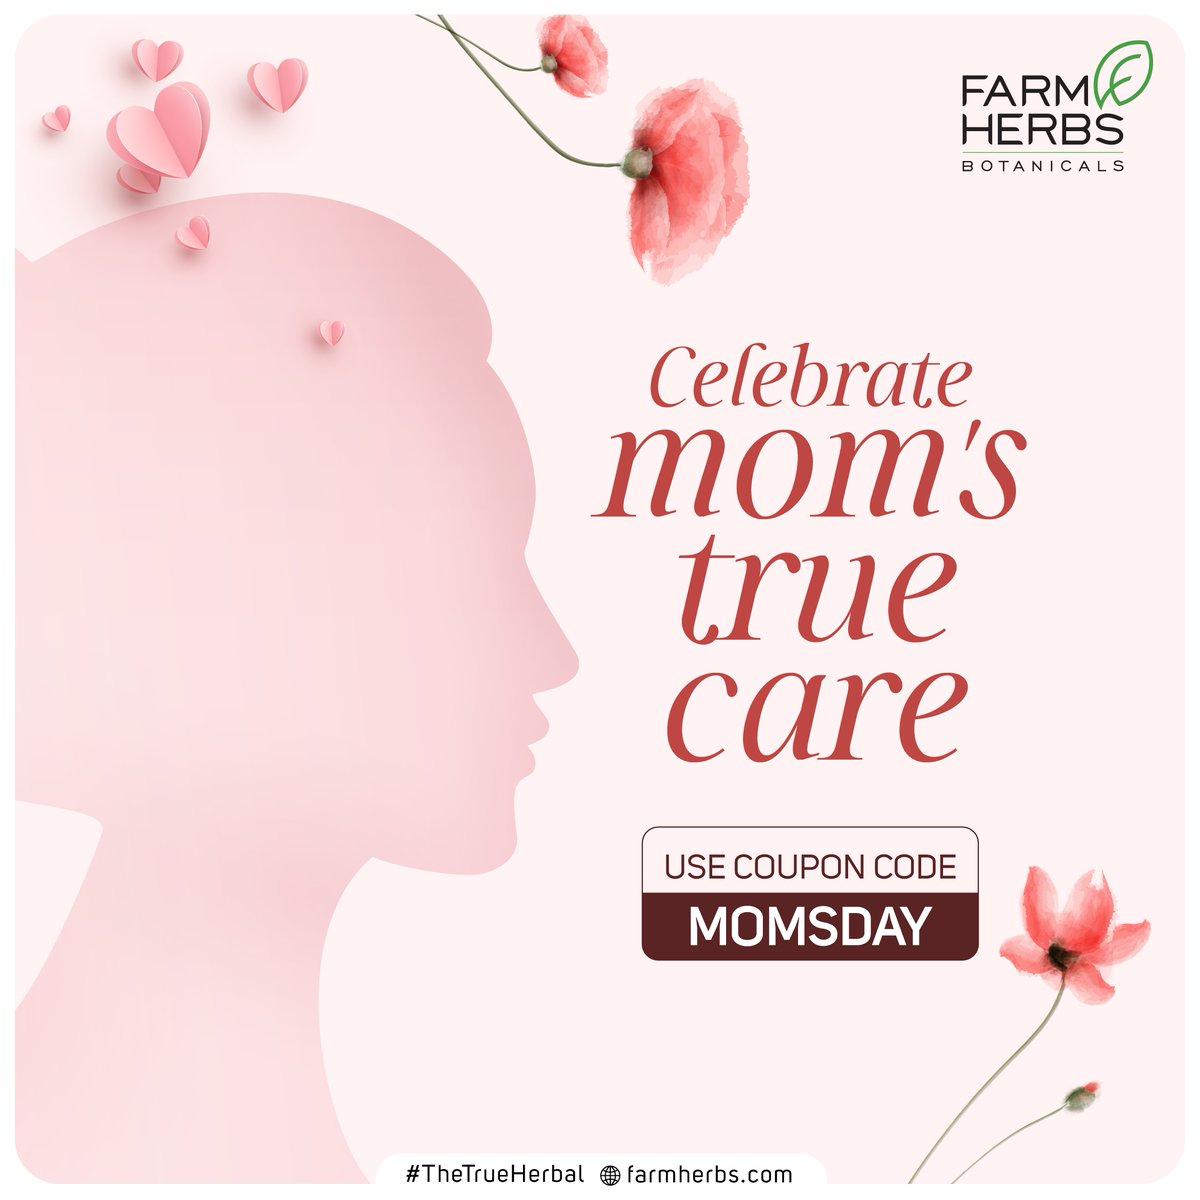 🌸This #MothersDay, honour Mom's True Care with #Farmherbs! 

With 100% plant-based, natural beauty and baby care products that nurture both her and Mother Earth.

Apply code 'MOMSDAY'  for exciting offers on farmherbs.com

#TrueCare #NaturalBeauty  #TheTrueHerbal